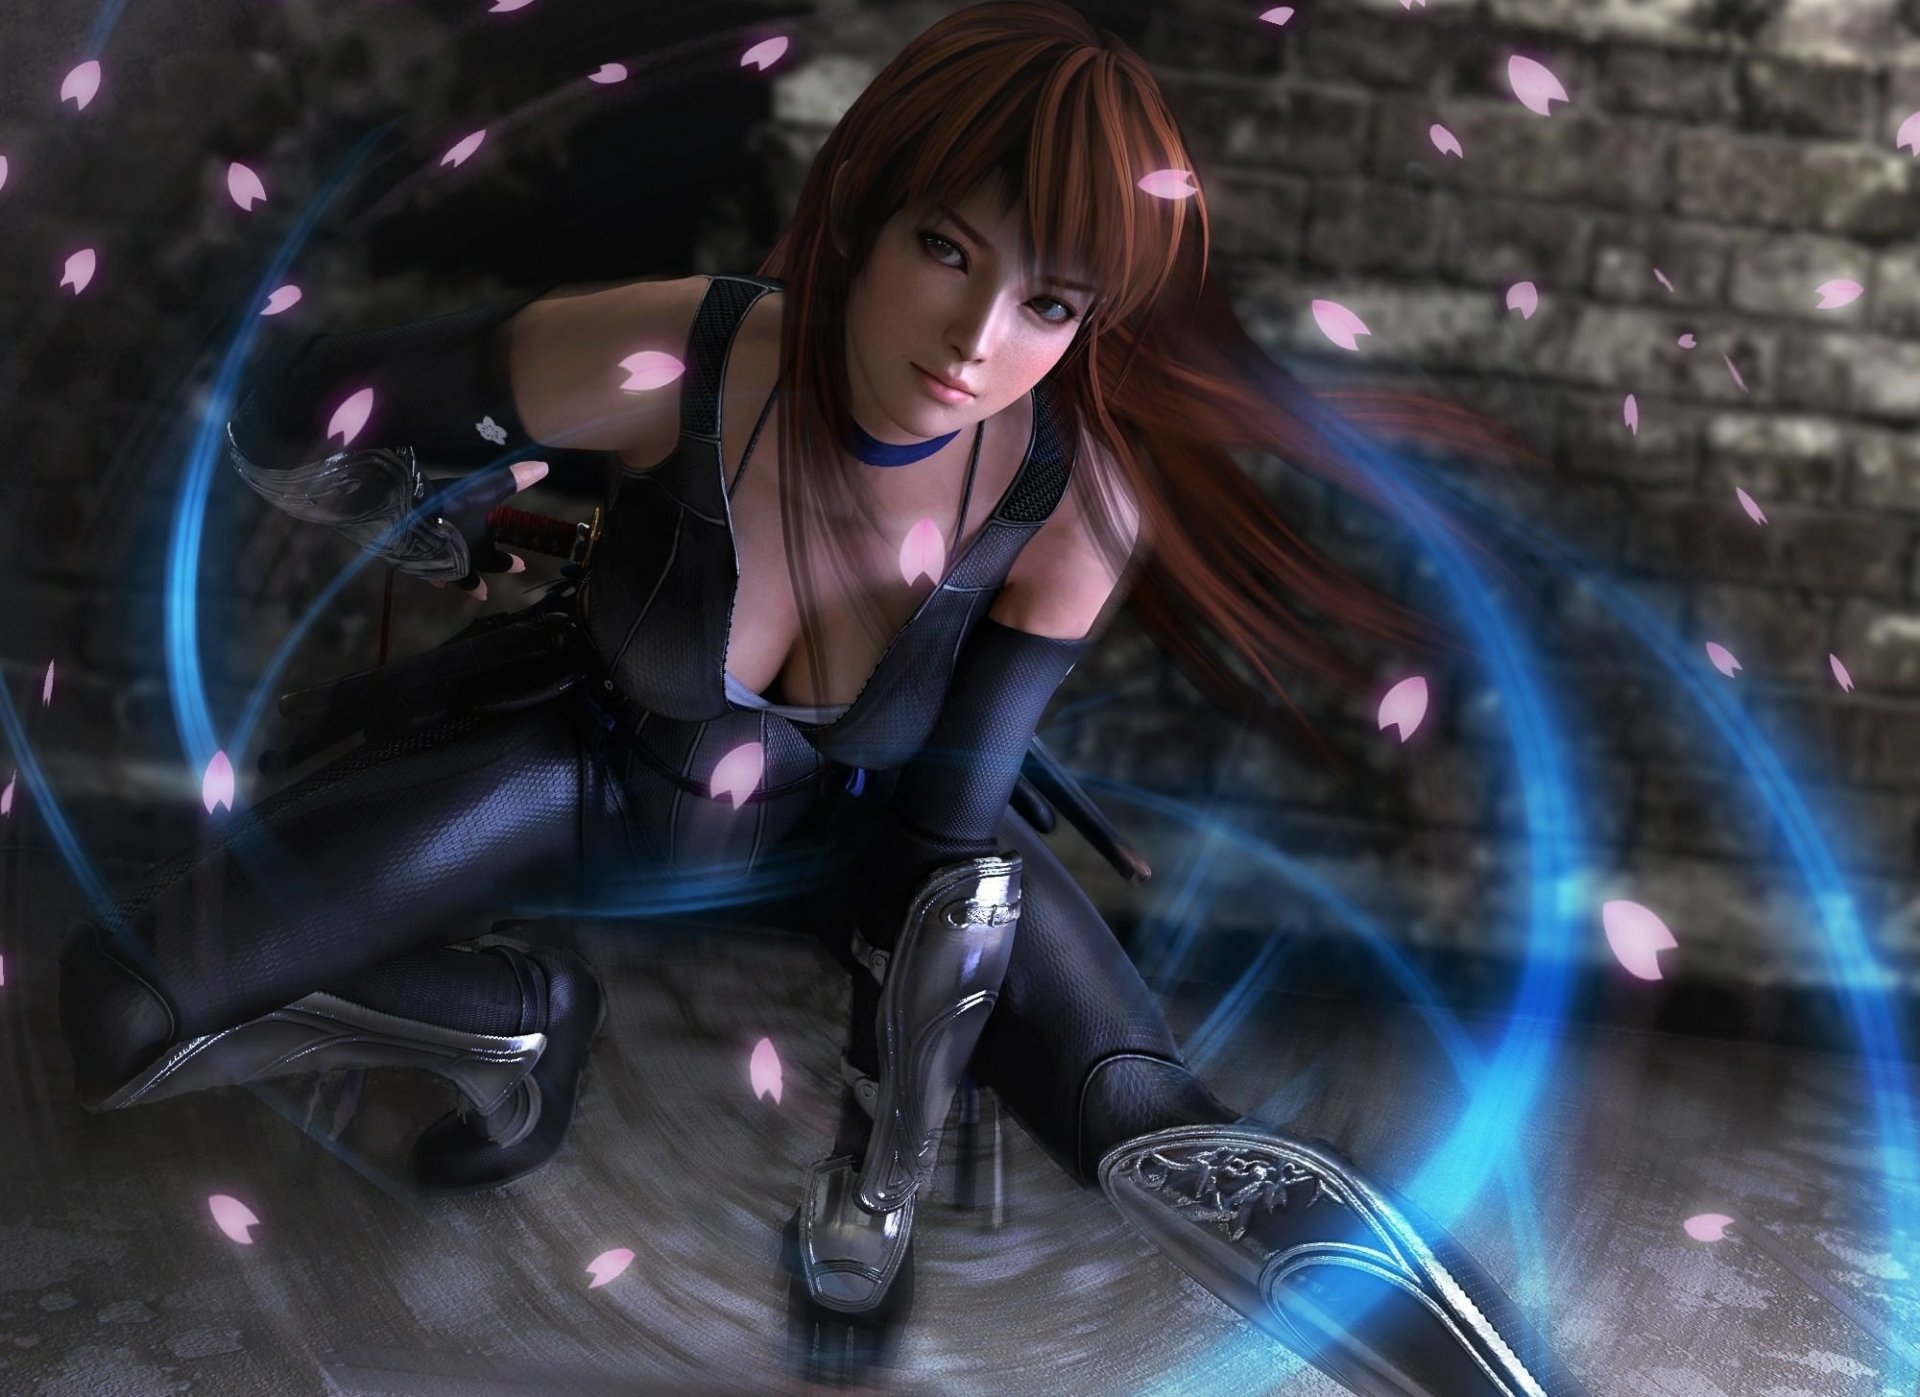 13 Kasumi Dead Or Alive Hd Wallpapers Background Images Wallpaper Abyss 6758